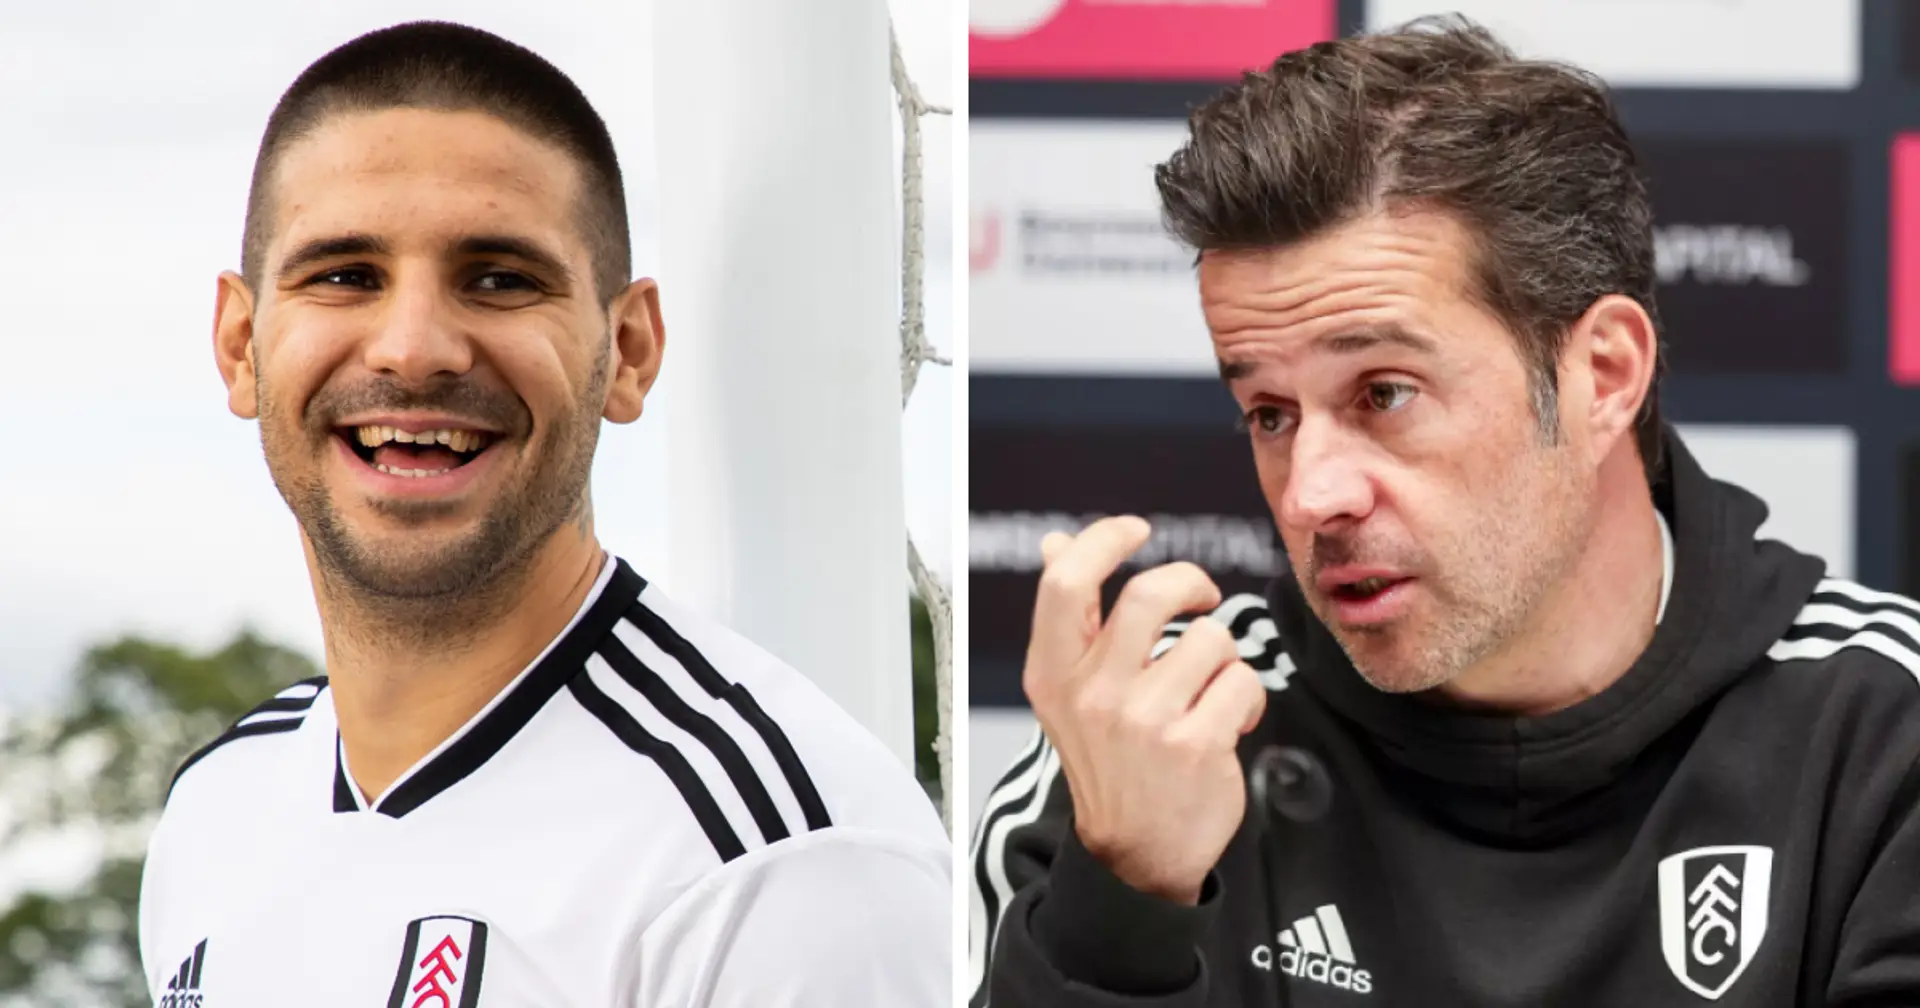 Marco Silva's agents hold talks with Saudis in London for lucrative £400,000-a-week deal with Al Ahli 